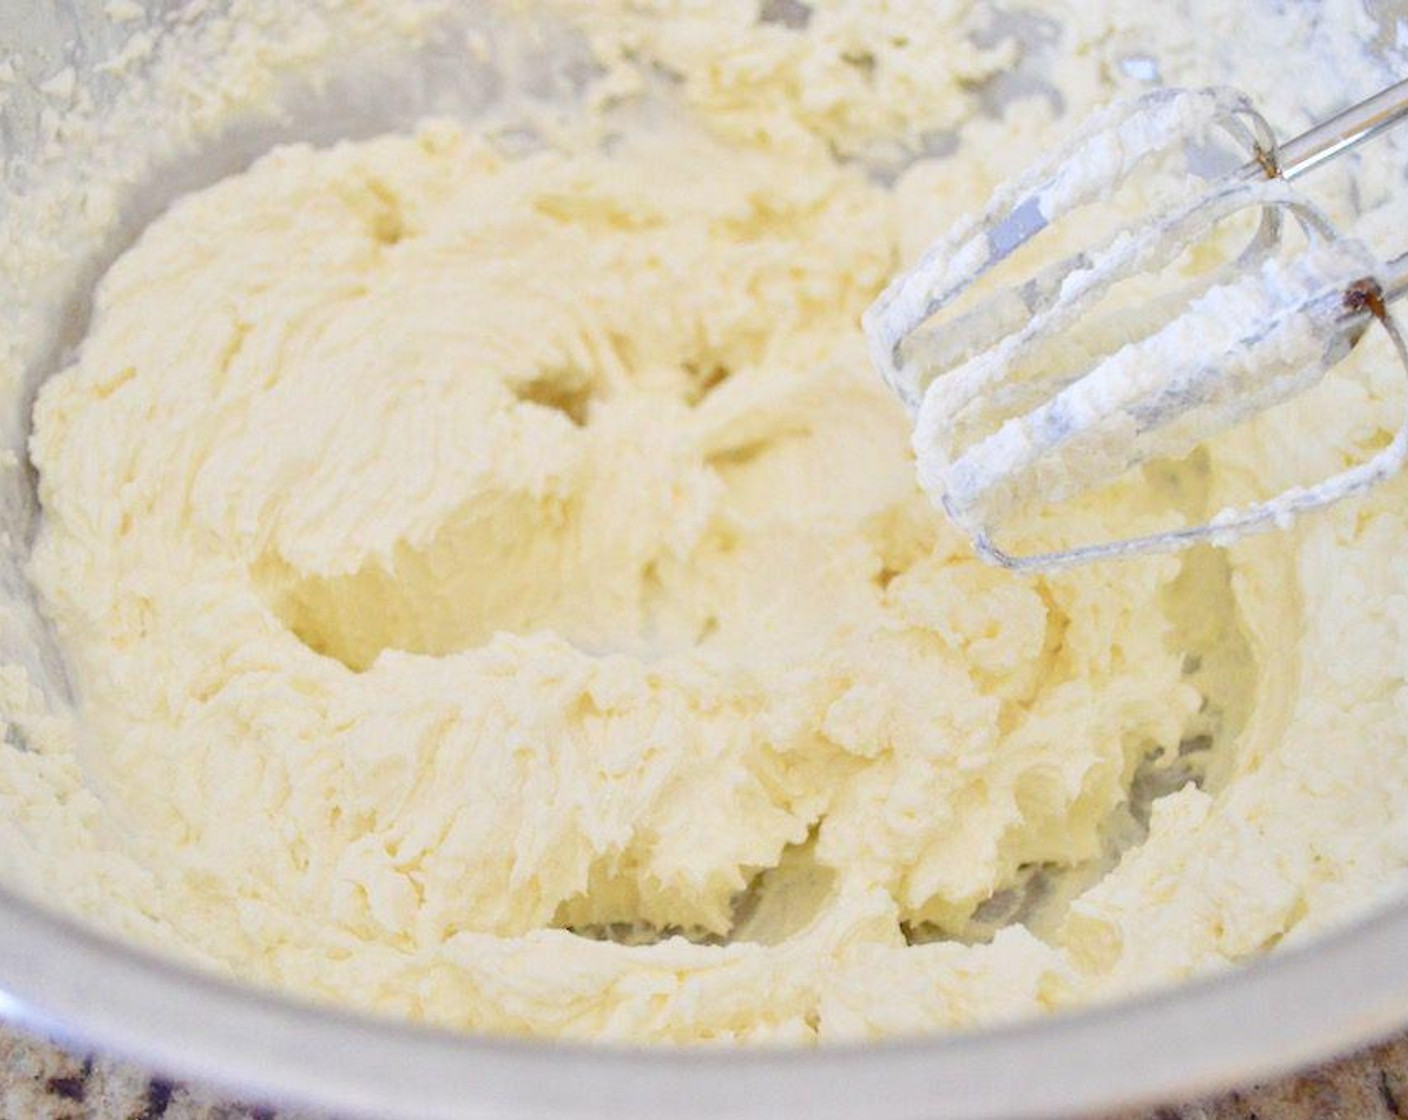 step 1 First, make the simple whipped cream. Combine the Heavy Cream (2 cups) and Powdered Confectioners Sugar (2/3 cup) in a large bowl and use a hand mixer to whip it up completely into a stiff but airy whipped cream. It takes a few minutes but it will happen, so be patient. Set it aside and make the pudding next.